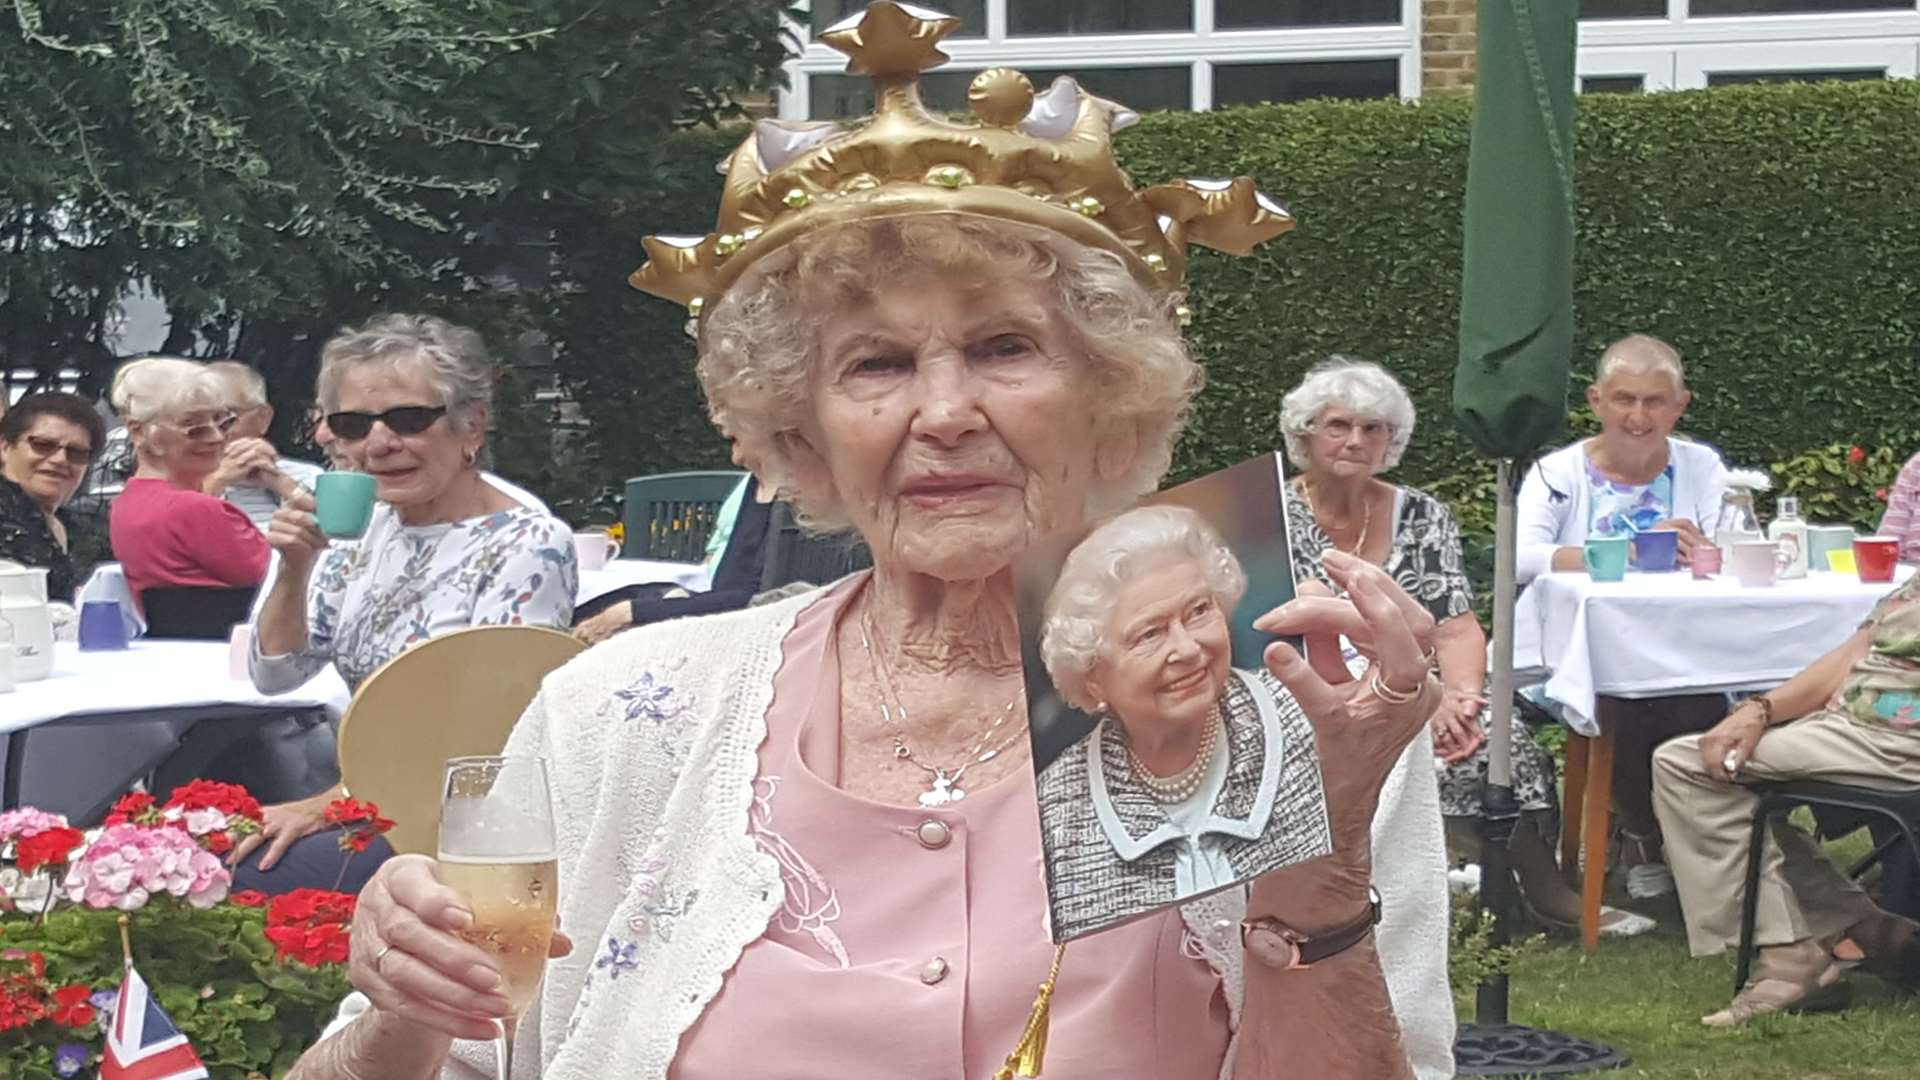 Marjorie Beton celebrates her 100th birthday with a glass of champagne, a crown and a card from the Queen